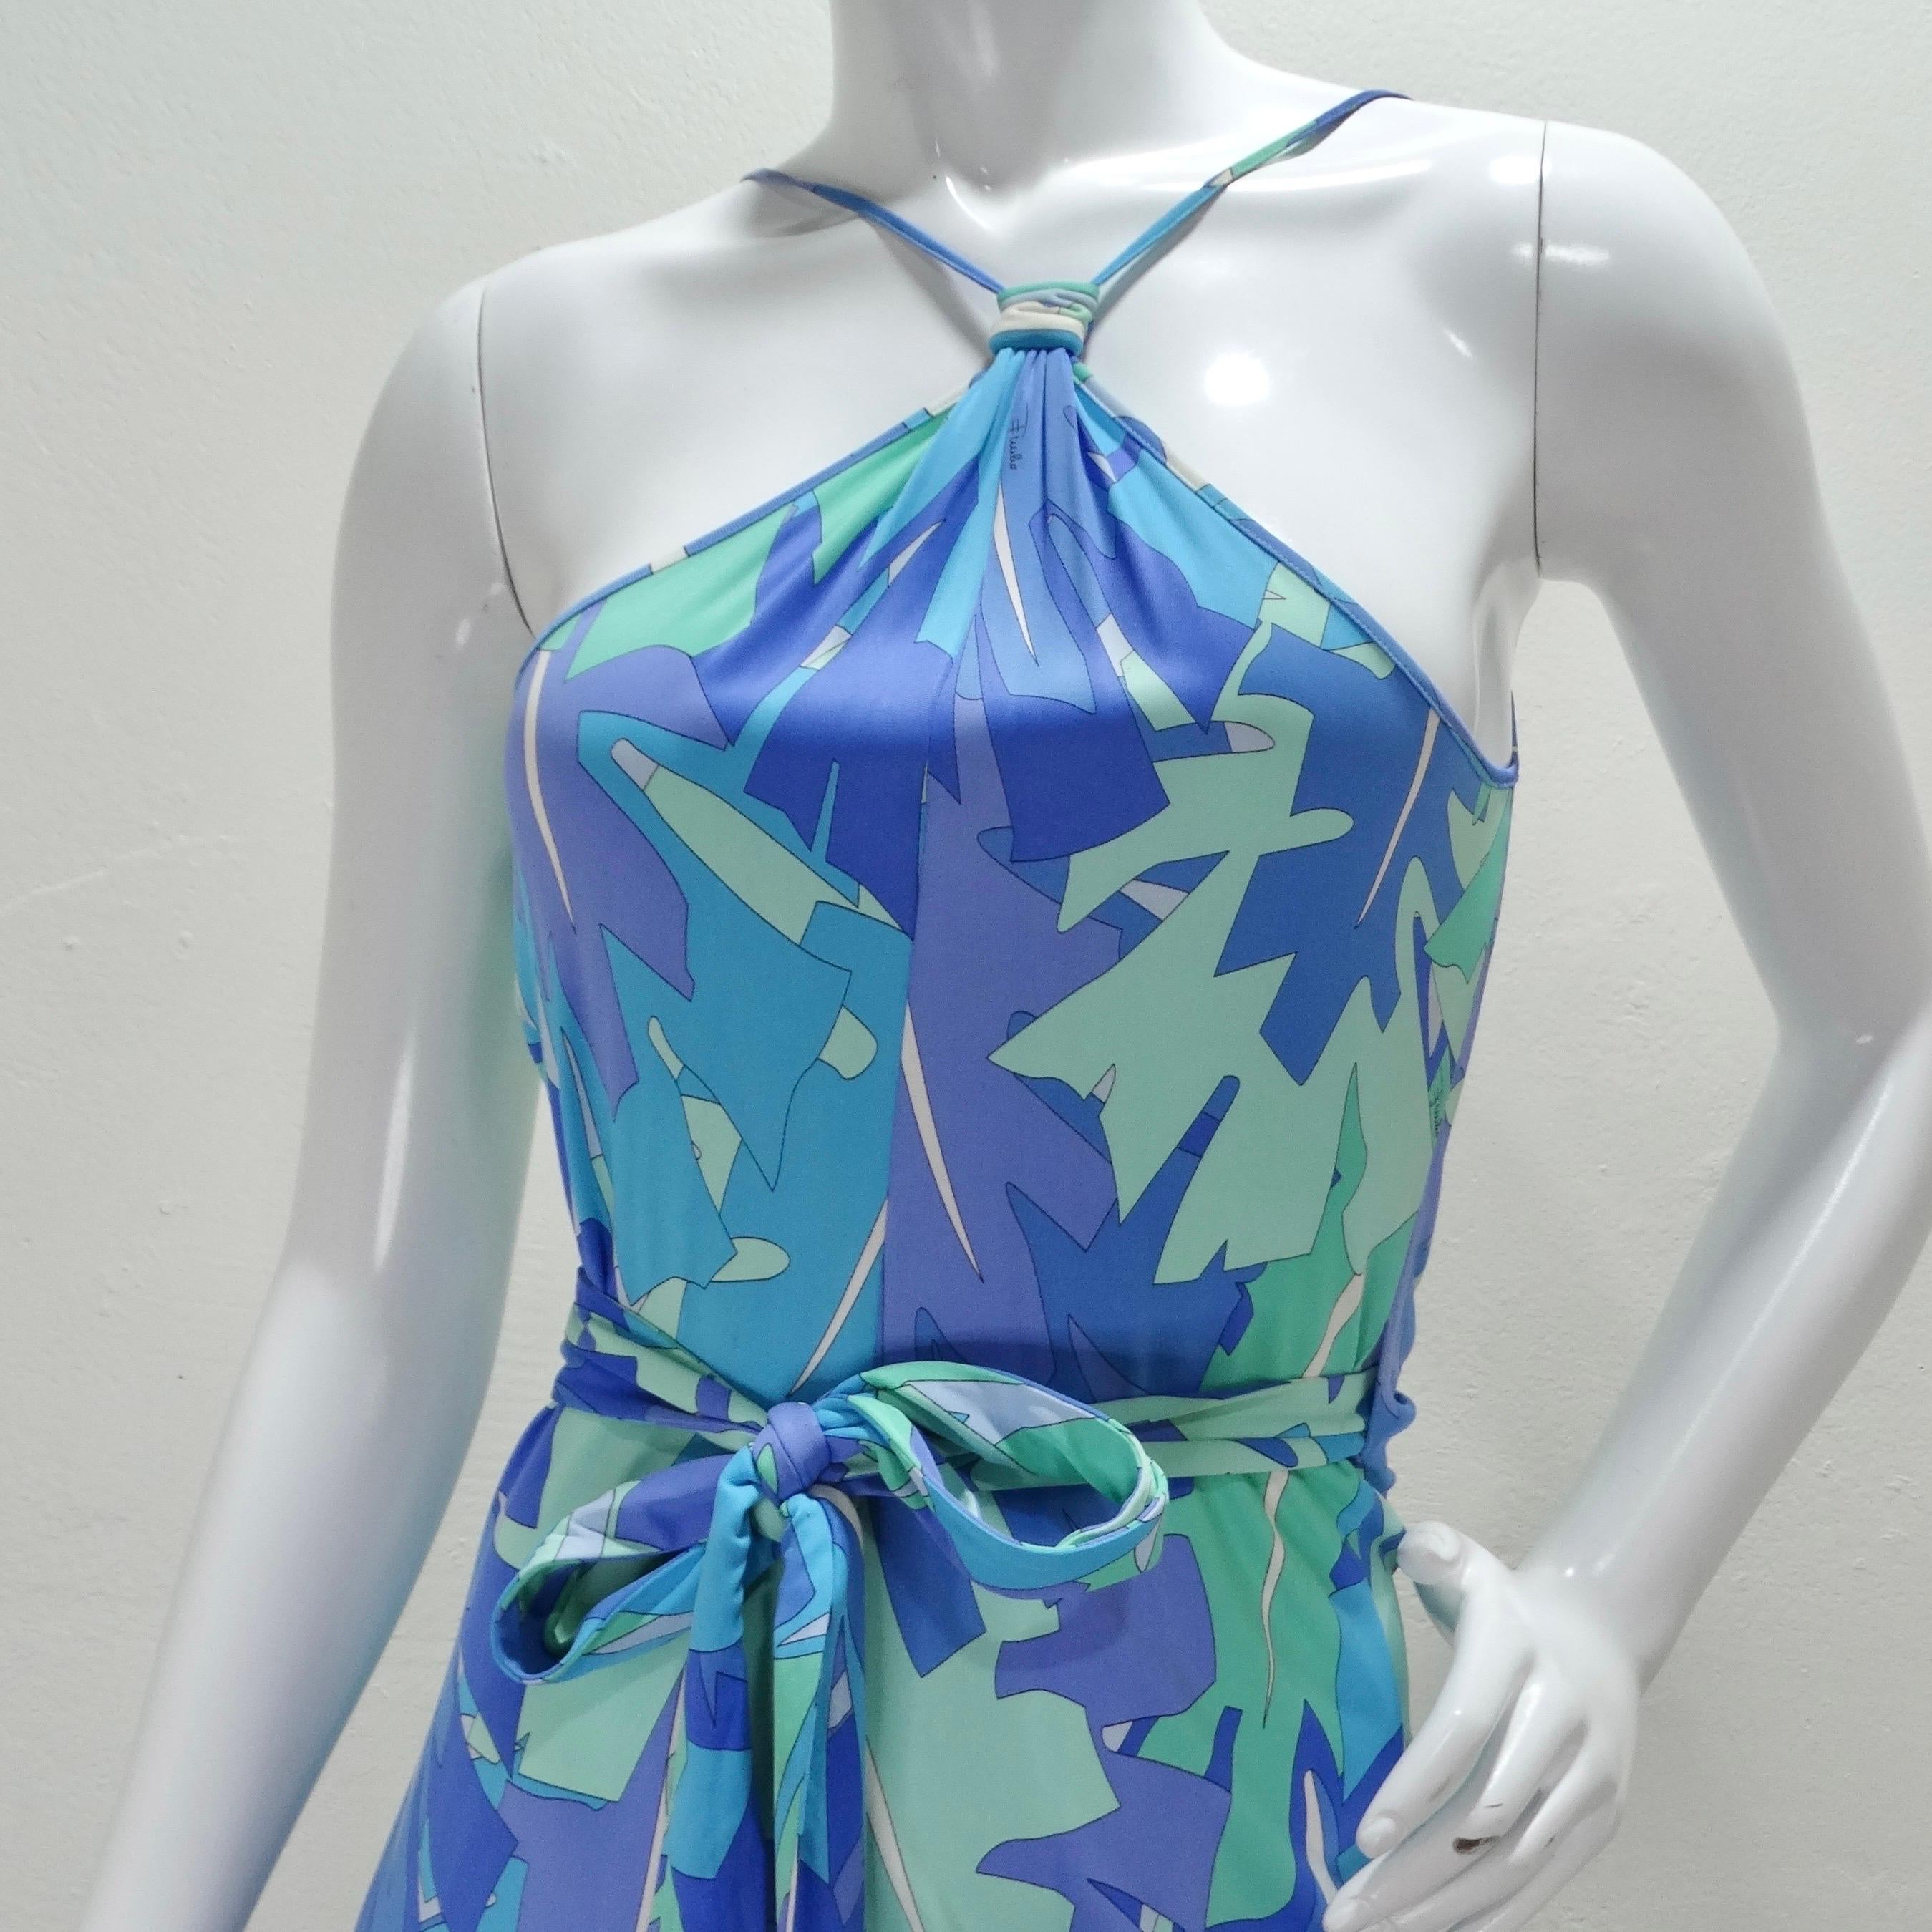 Get your hands on this magical 1990s Emilio Pucci halter wrap dress! Emilio Pucci presents his signature whimsical graphic this time in a serene pallet of blue shades  that come together to create this vibrant and eye catching print. An elegant